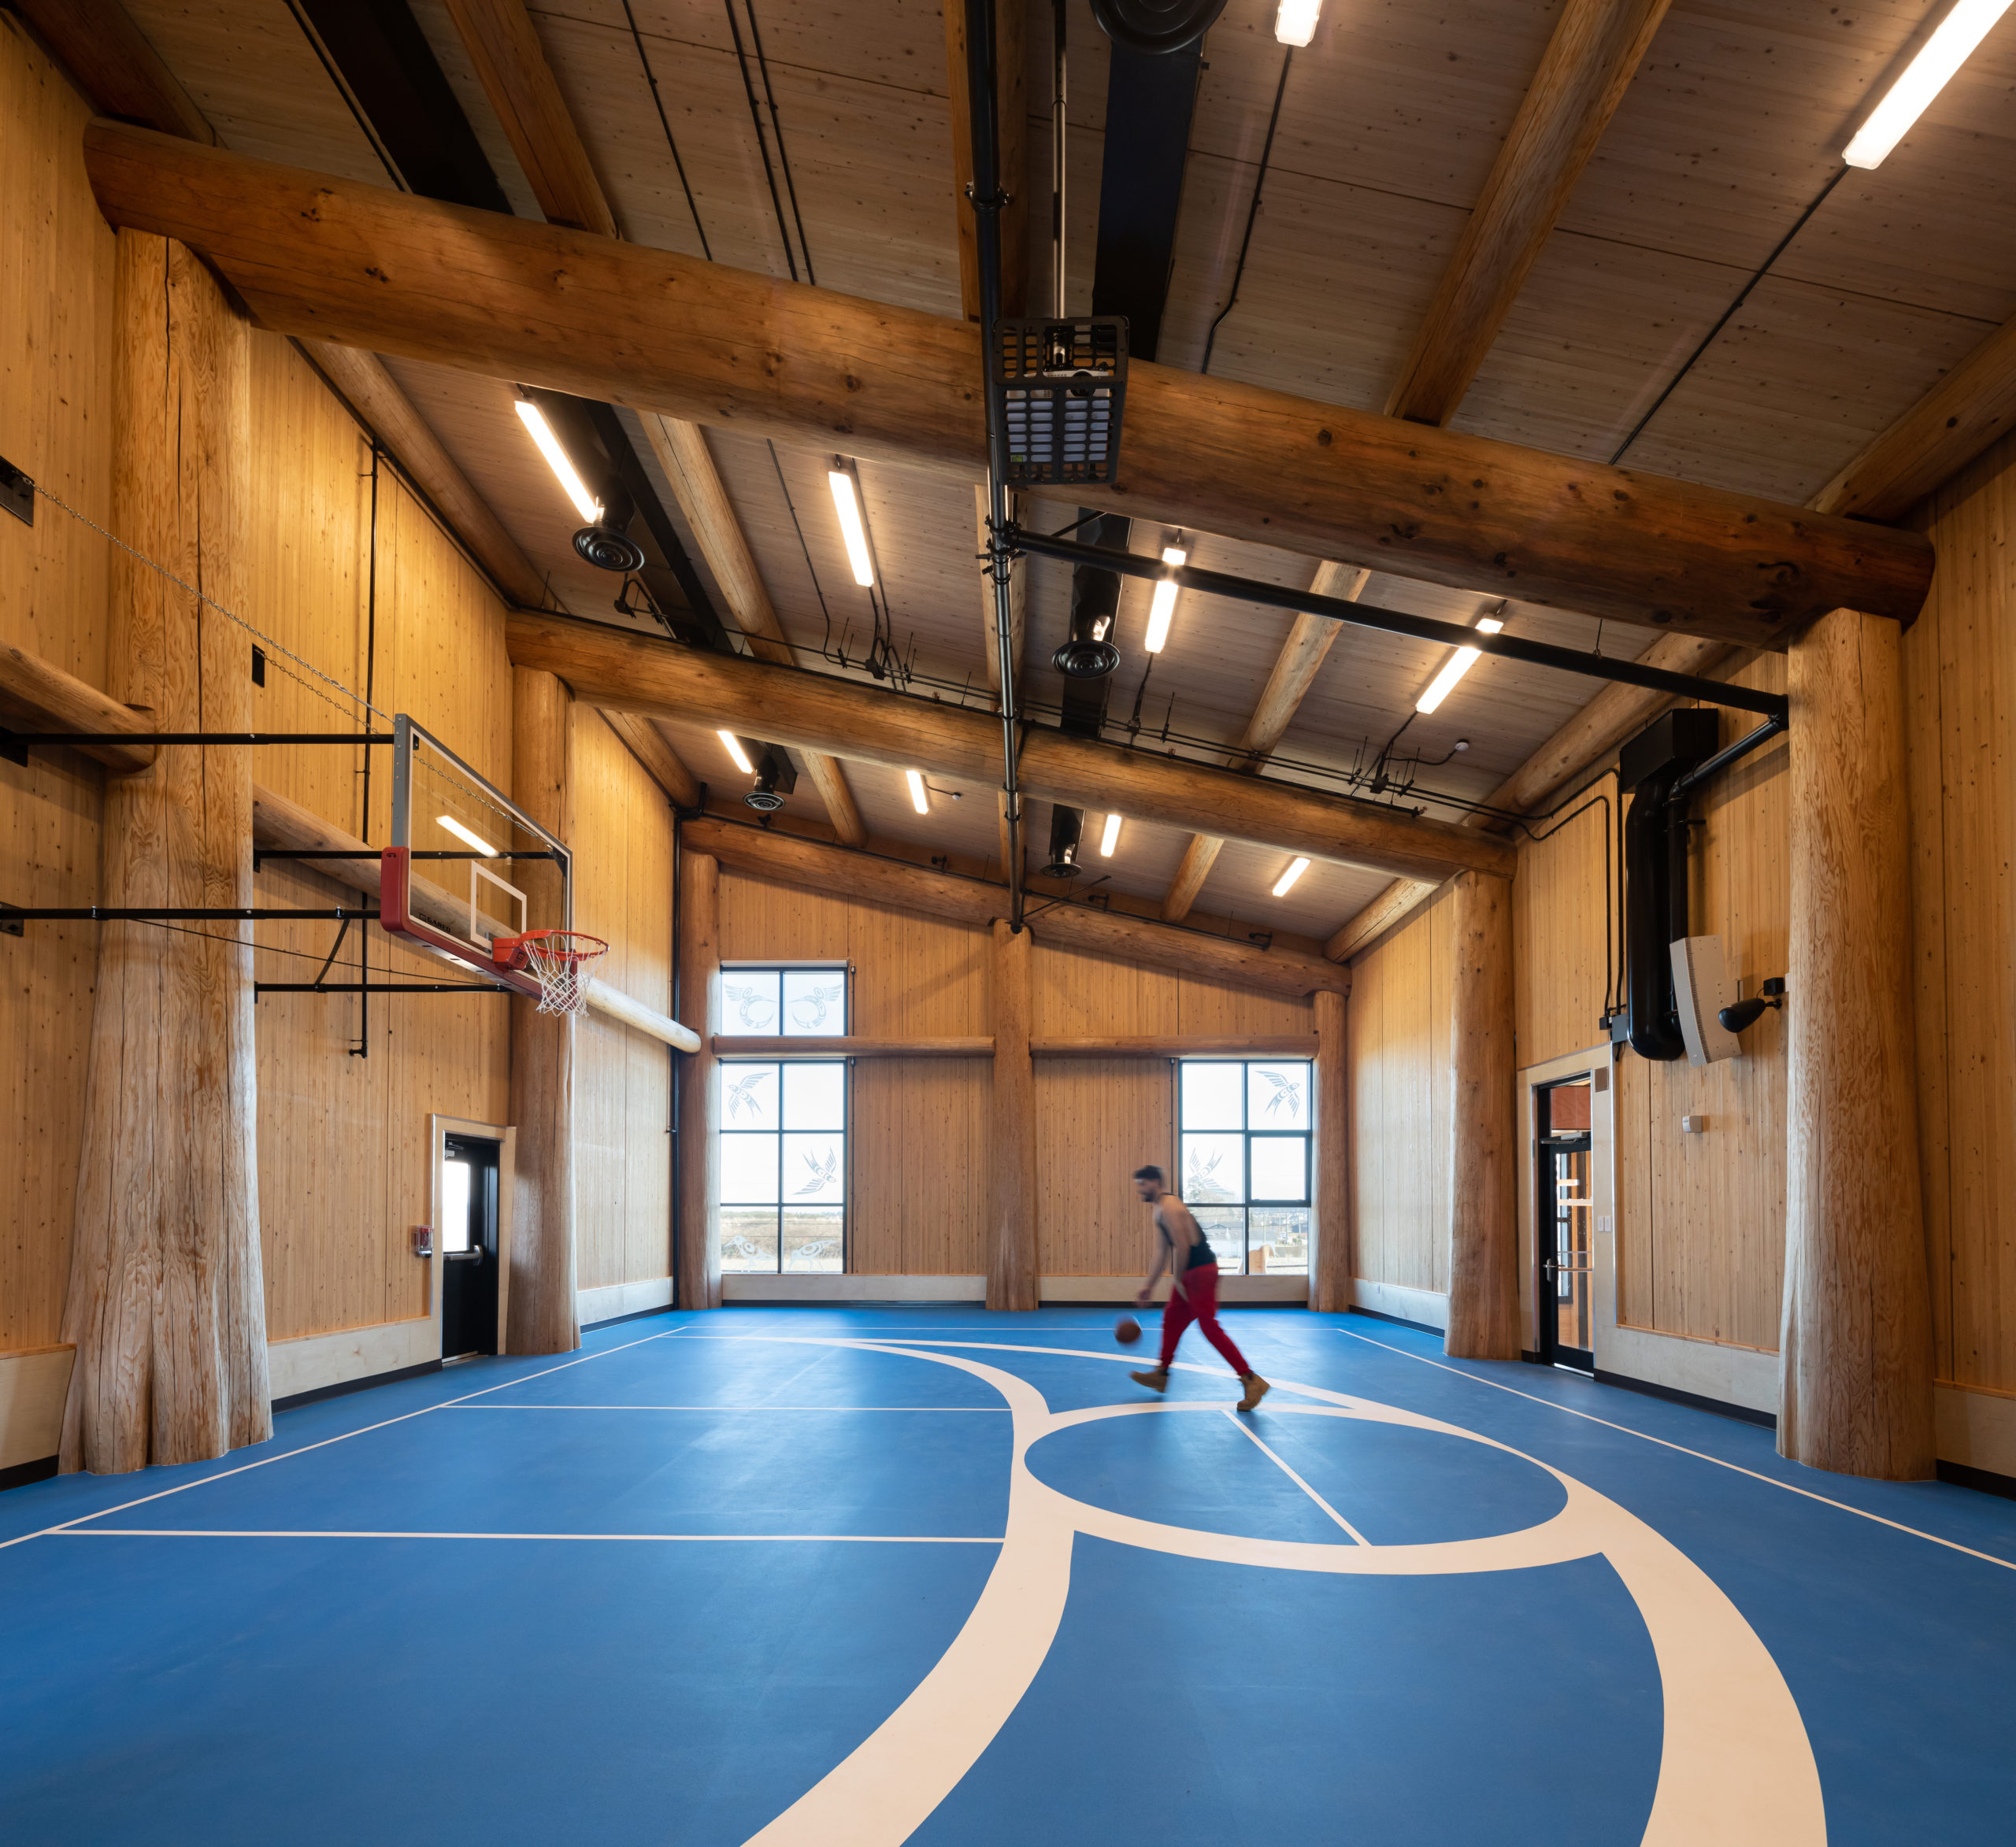 Interior view of gymnasium with slanted roof. The entire walls and ceiling have exposed wood, with large mass timber columns. A young person is playing basketball in the middle of the room with blue flooring with white court marks.